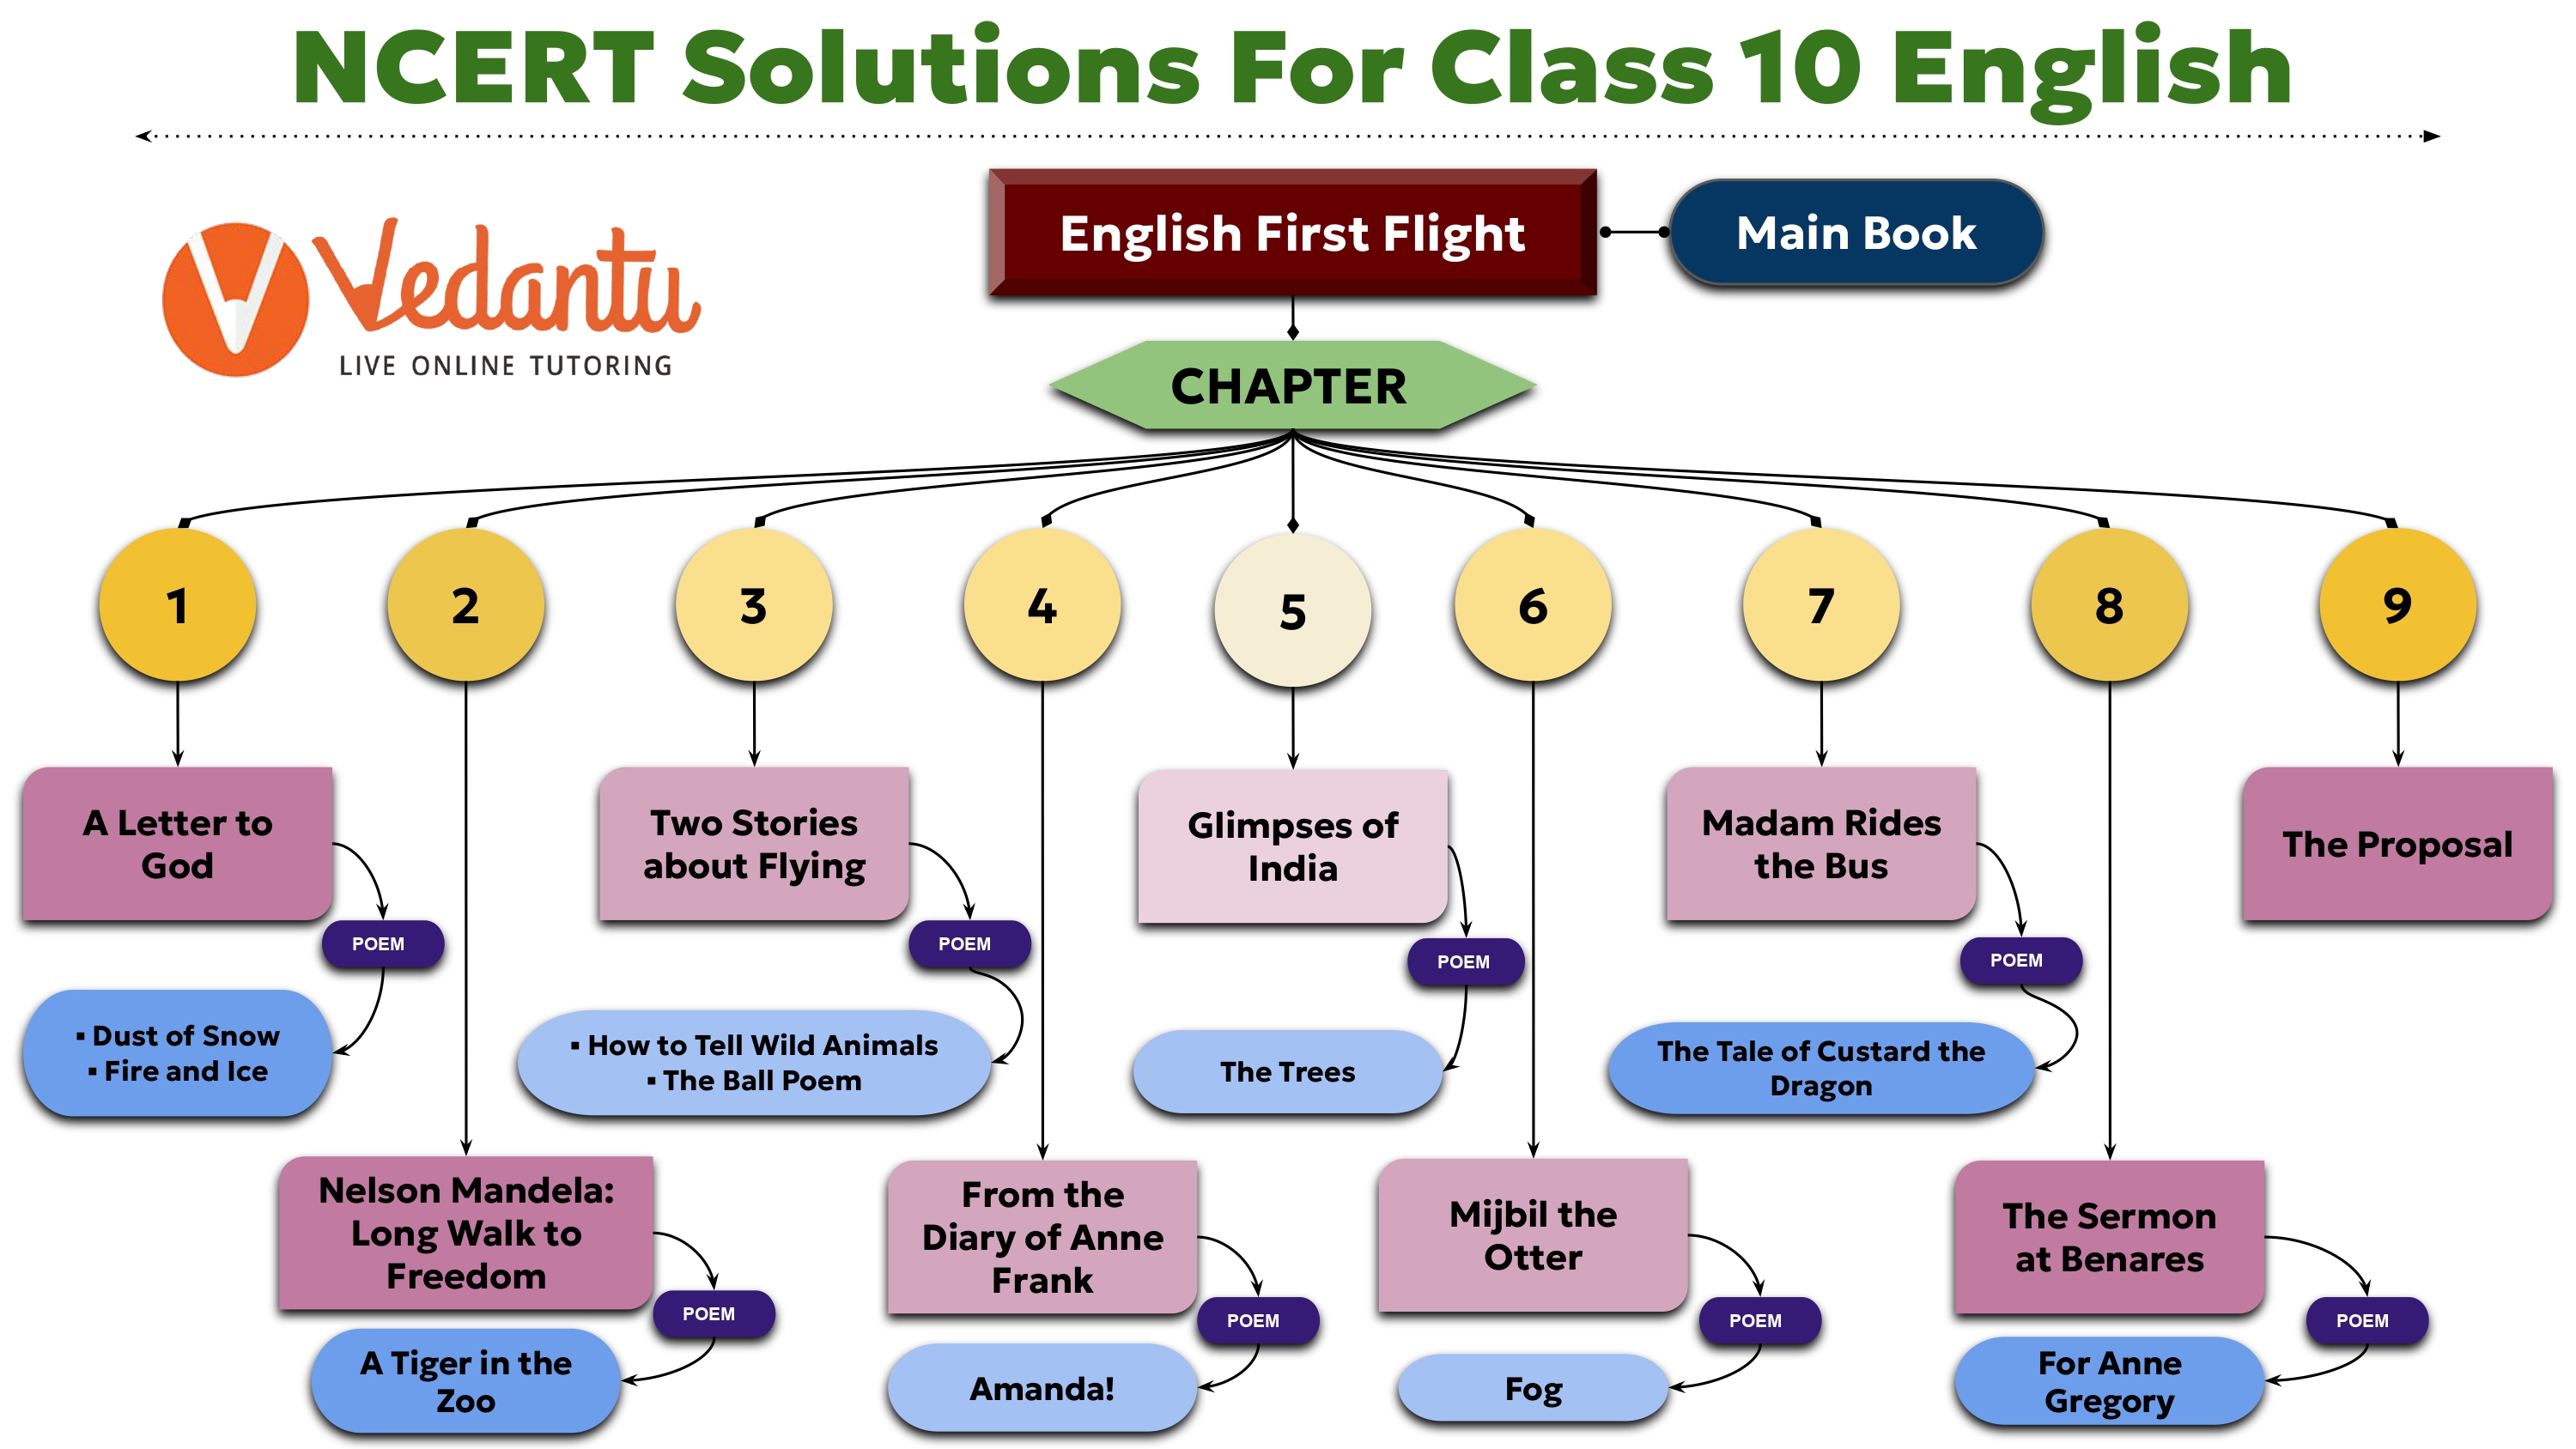 NCERT Solutions for Class 2 English Marigold - Learn CBSE 2023-24